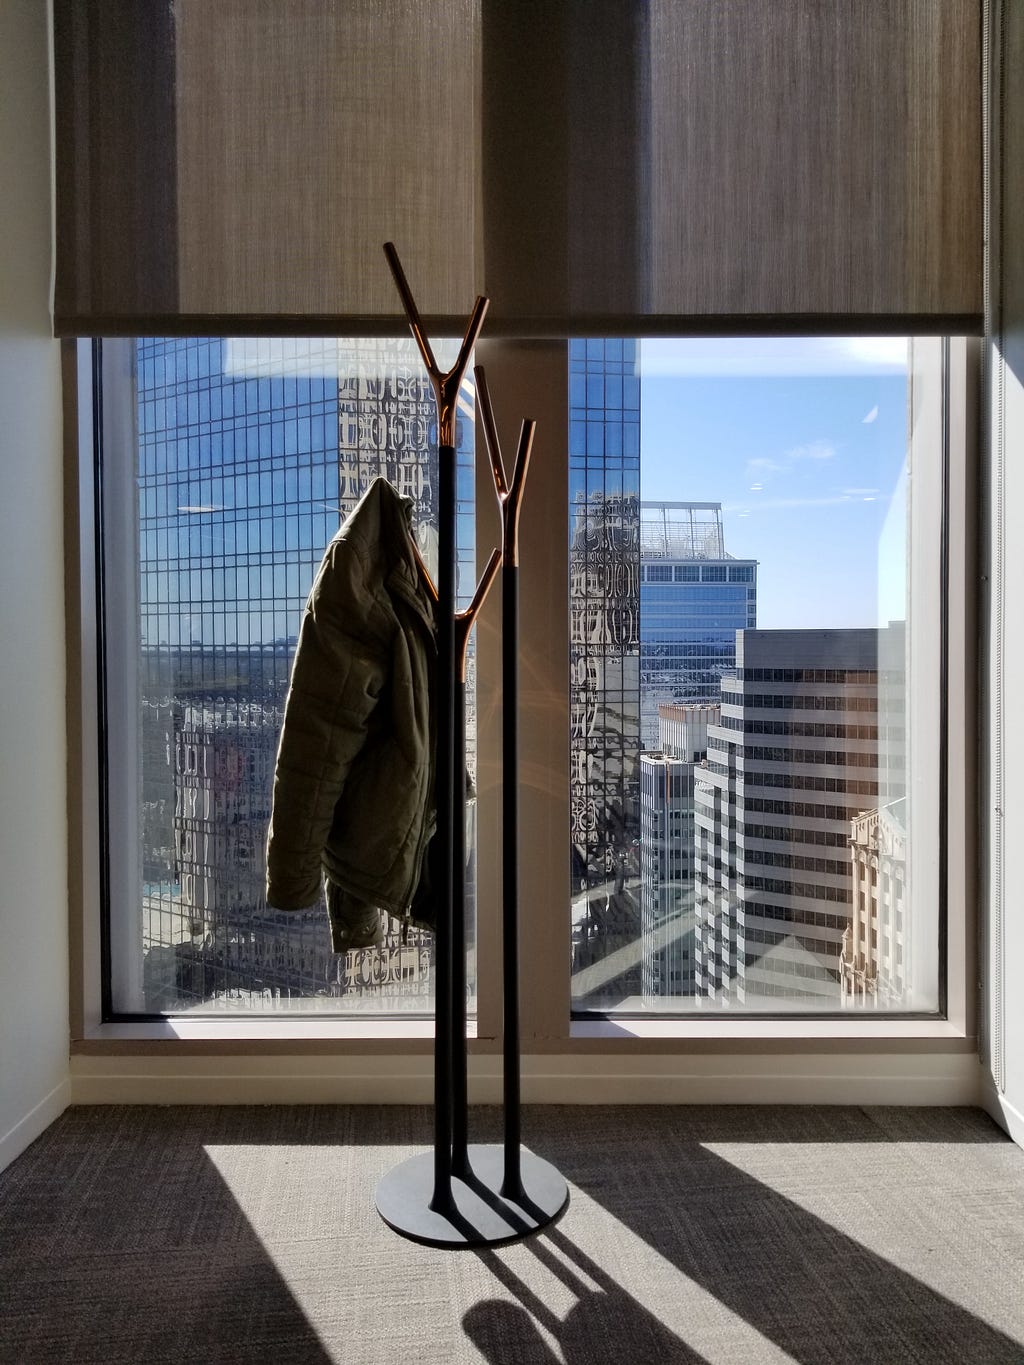 Just a coat rack with a coat on it. Not a guy or anything